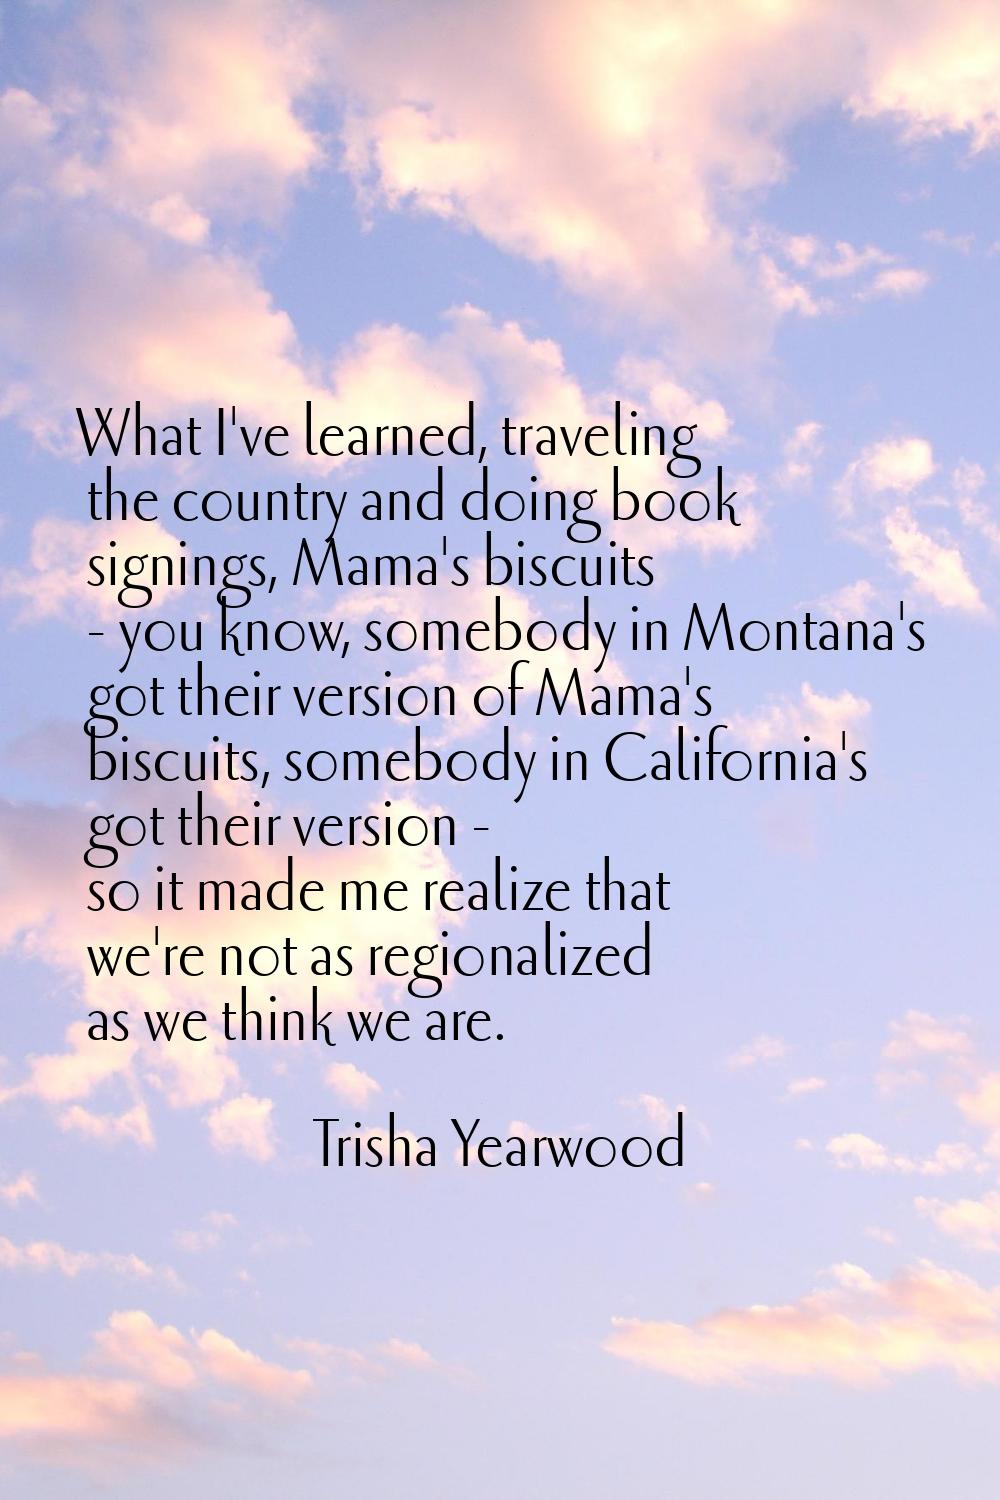 What I've learned, traveling the country and doing book signings, Mama's biscuits - you know, someb